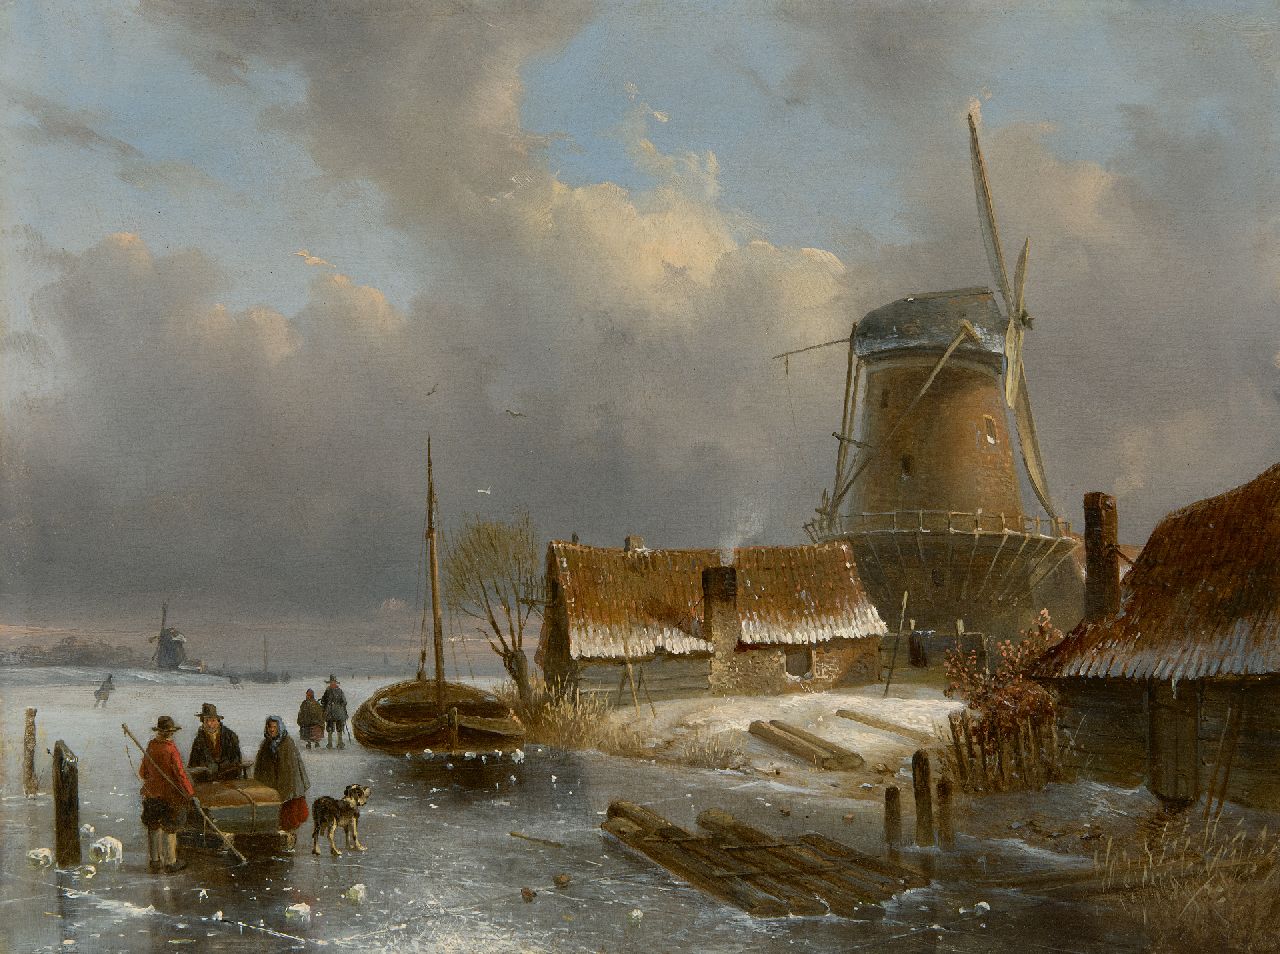 Leickert C.H.J.  | 'Charles' Henri Joseph Leickert | Paintings offered for sale | Dutch winter landscape with a sledge and figures on the ice, oil on panel 24.4 x 32.5 cm, signed l.r.